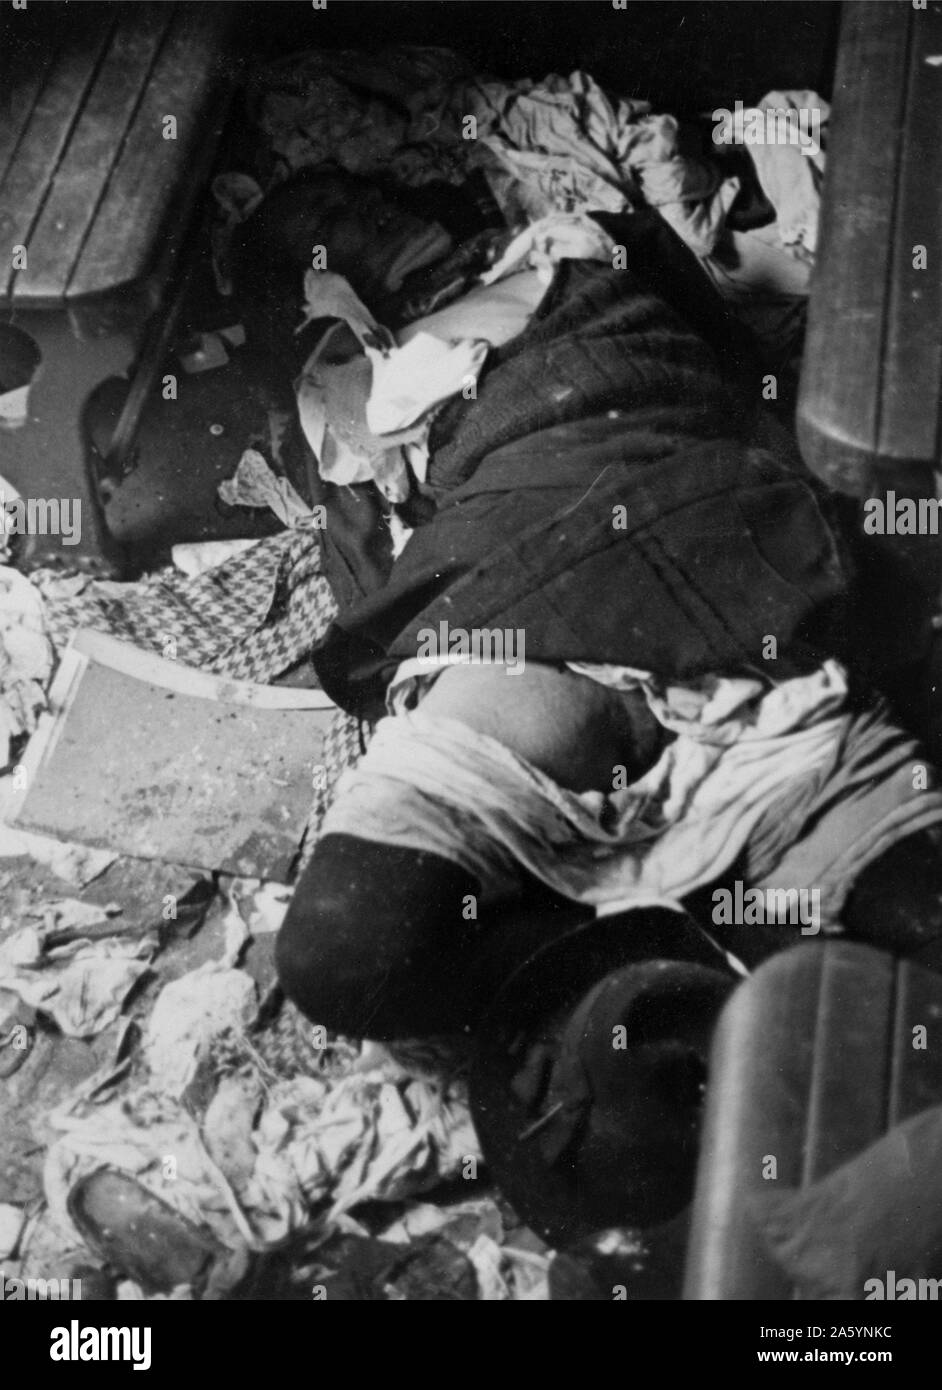 corpses of civilians executed during the assault on Metgethen, Germany, by Soviet troops in 1945. World War II, 1939-1945 Stock Photo